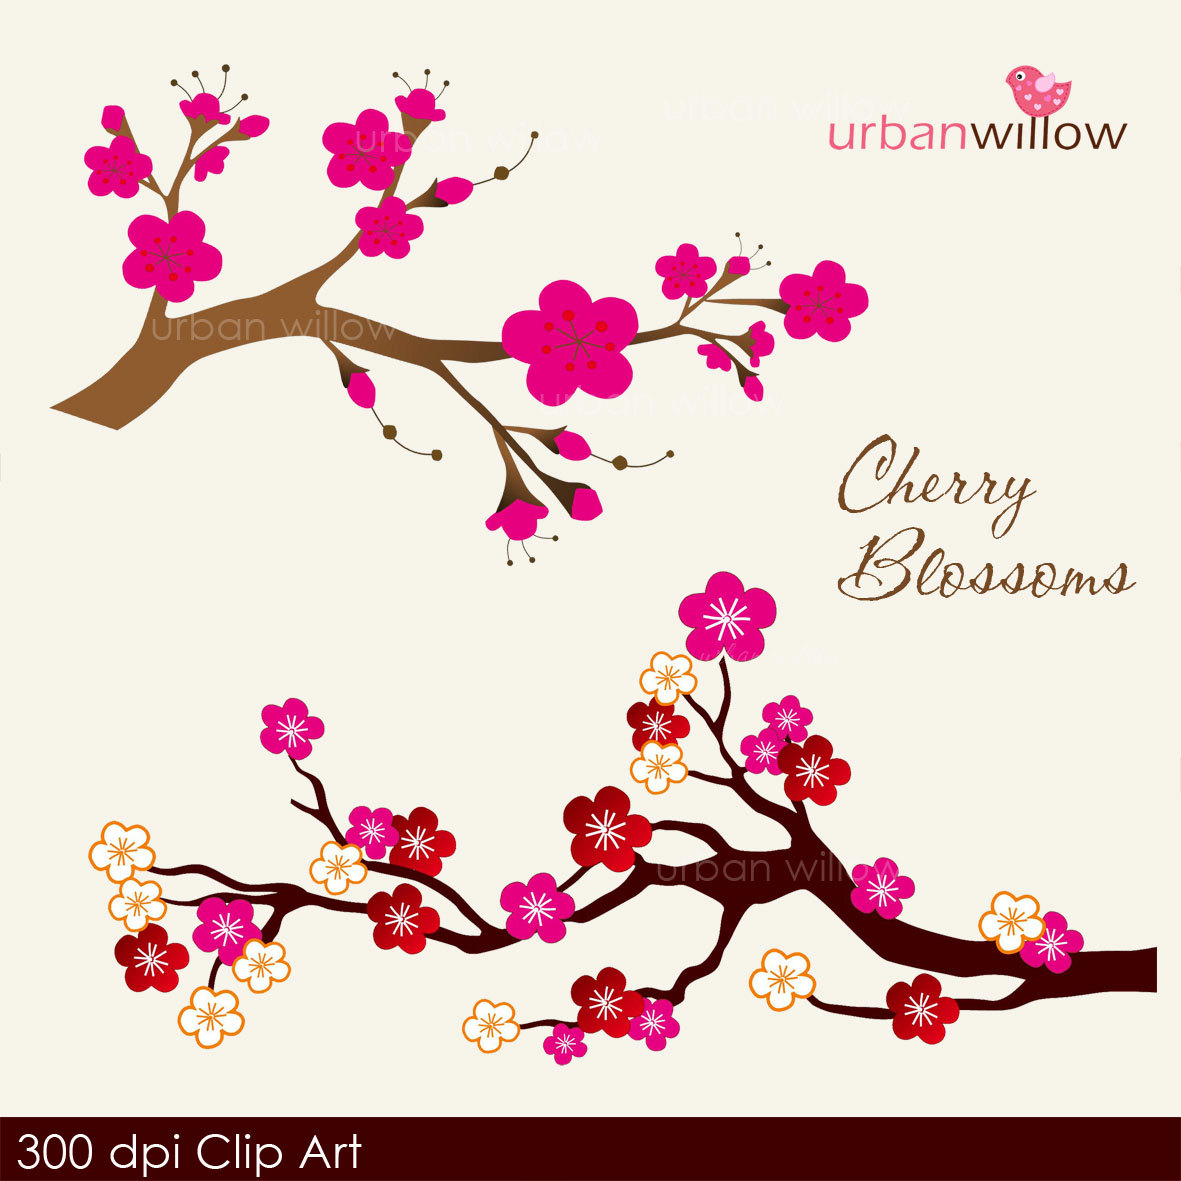 Instant Download Cherry Blossom Blush  Png   Jpeg By Urbanwillow